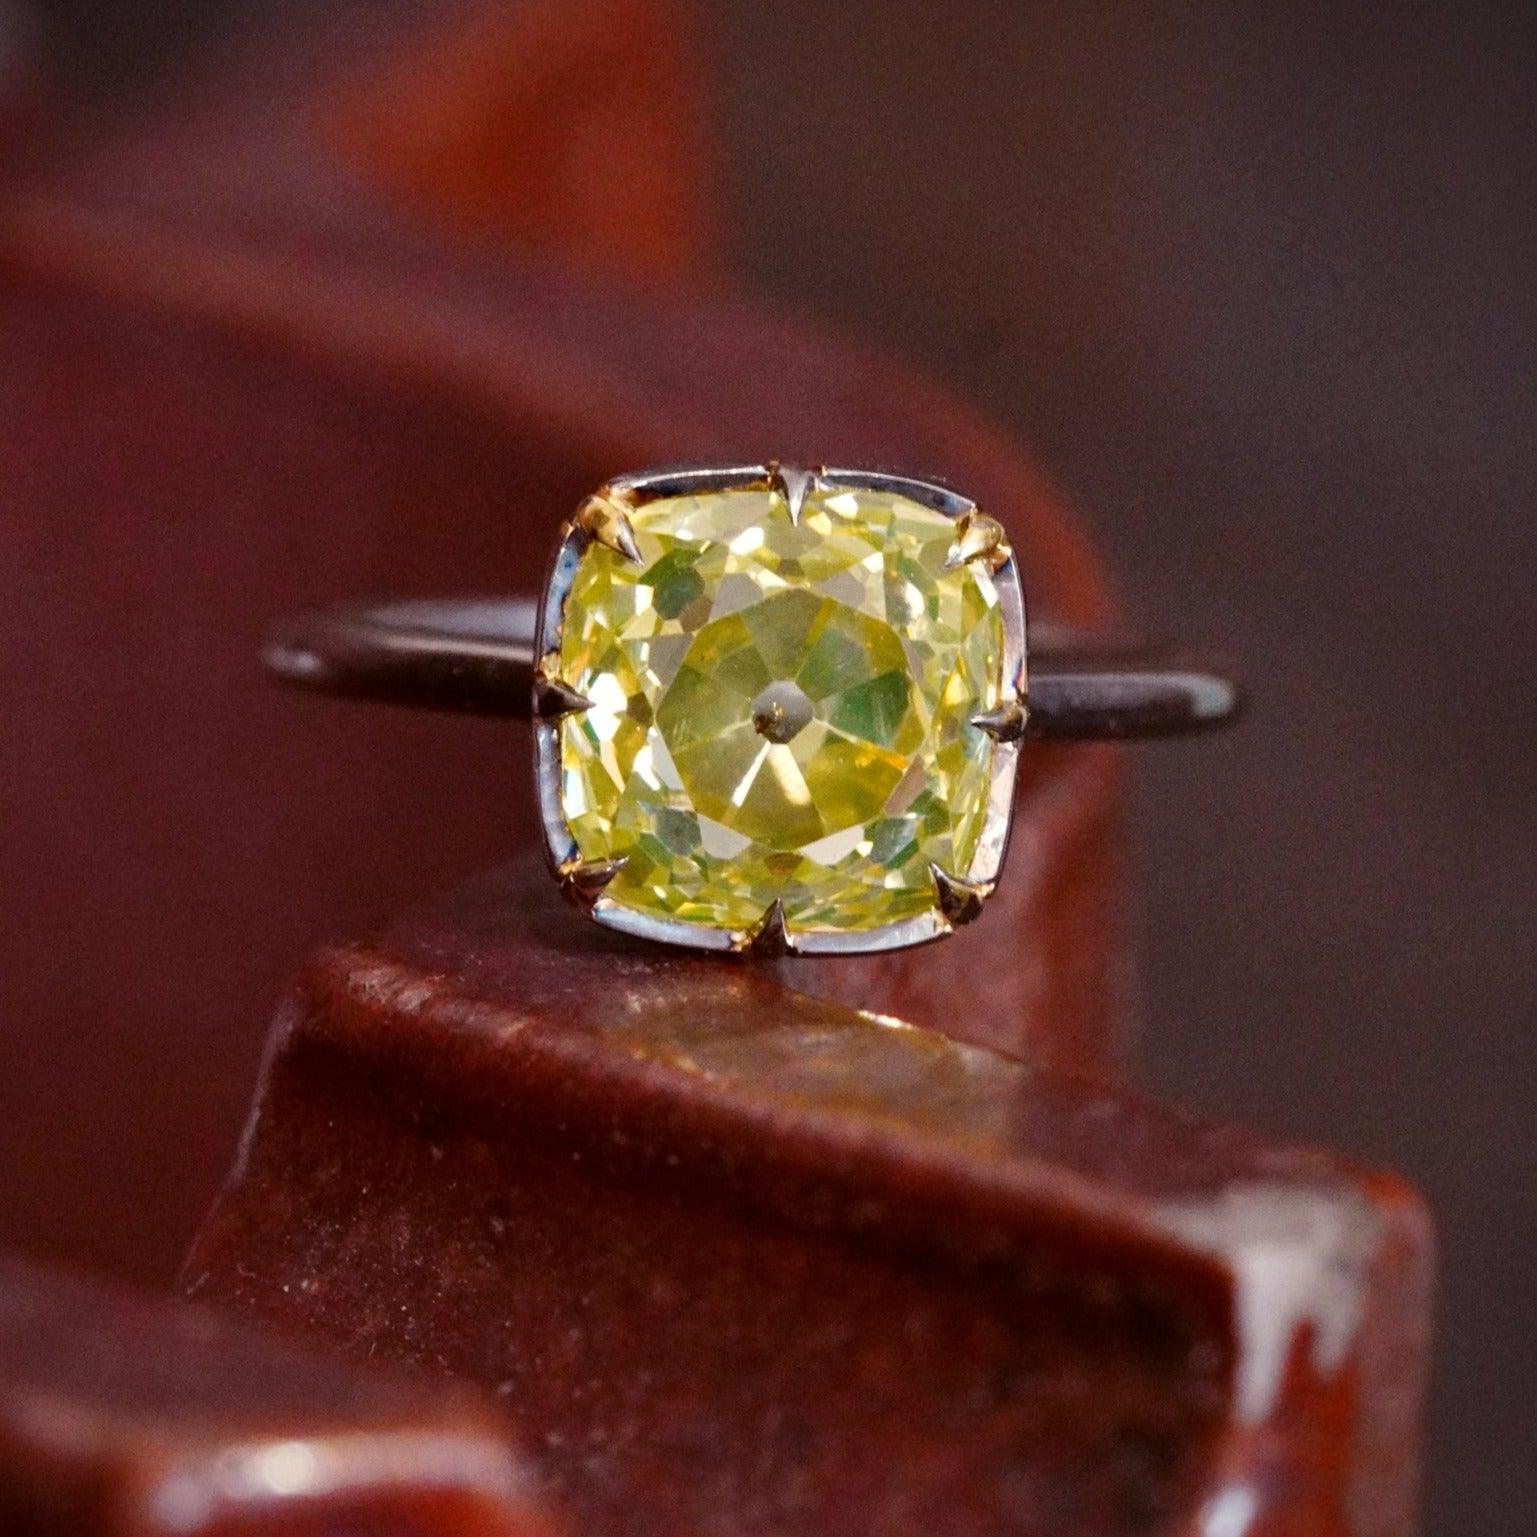 4.13 Carats of Lemon-Lime: The Unconventional 18K Gold Ring with a Rare and Distinctive Old Mine Diamond - Jogani